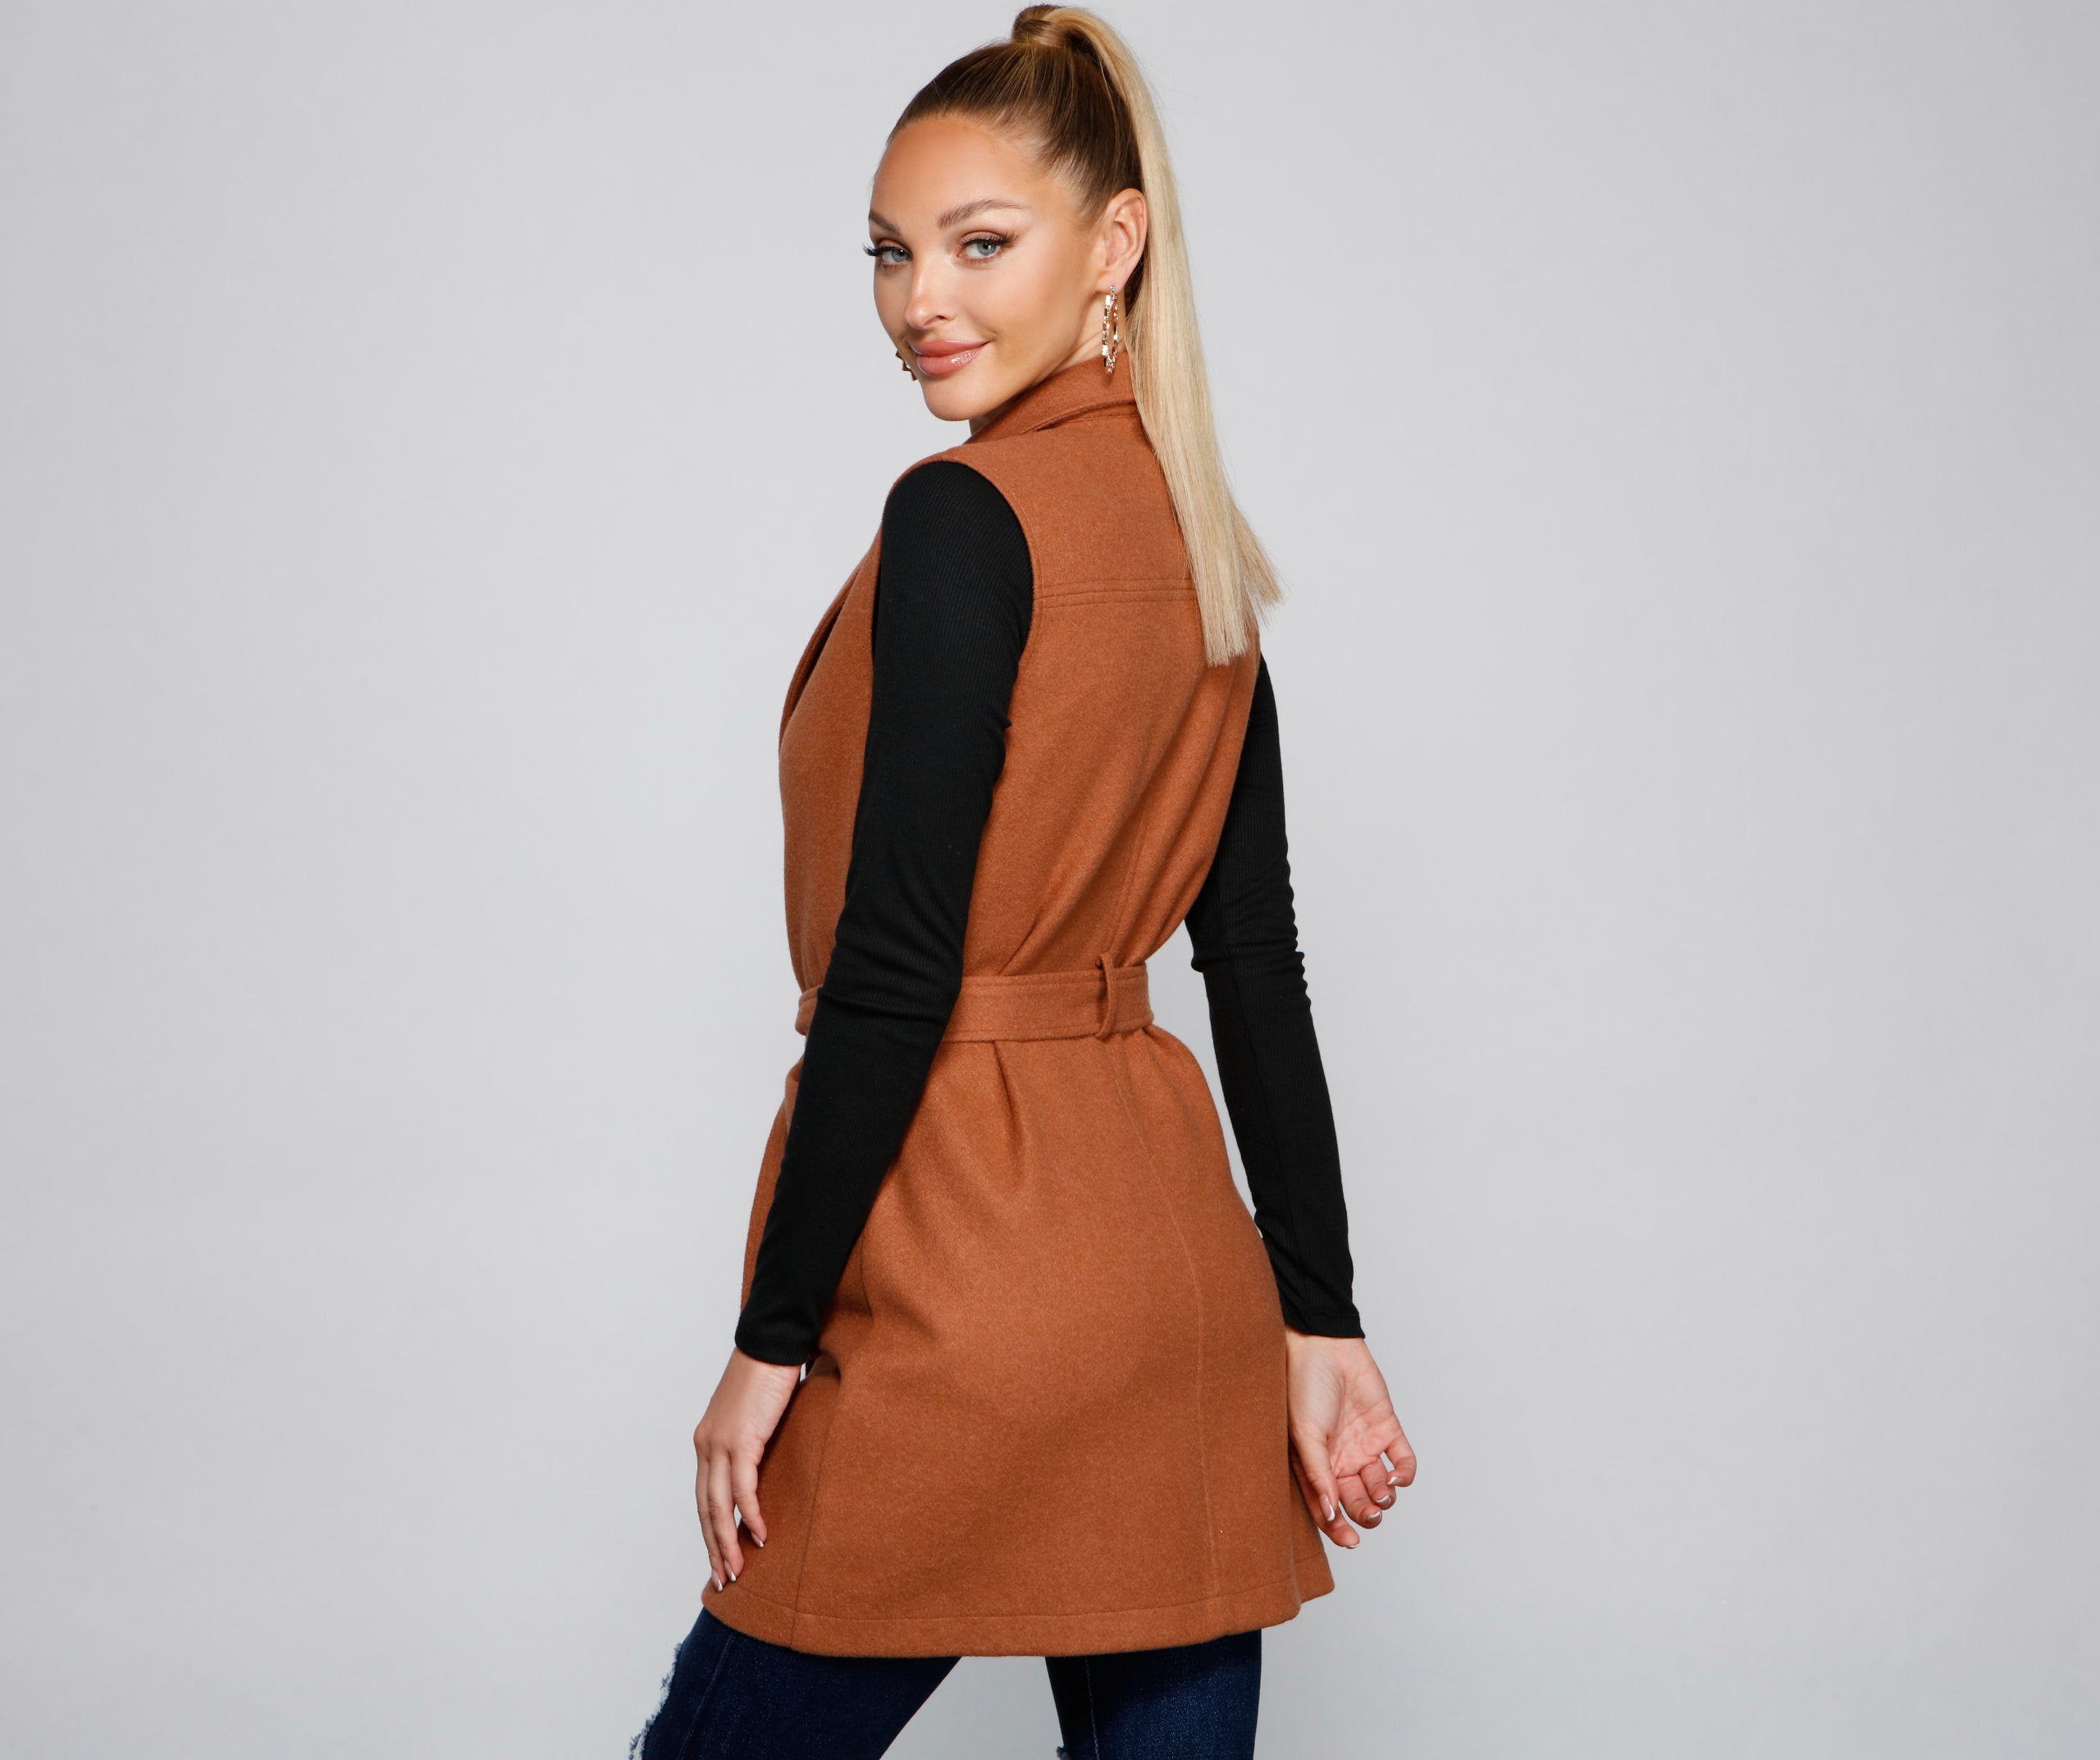 City Girl Faux Wool Trench Vest